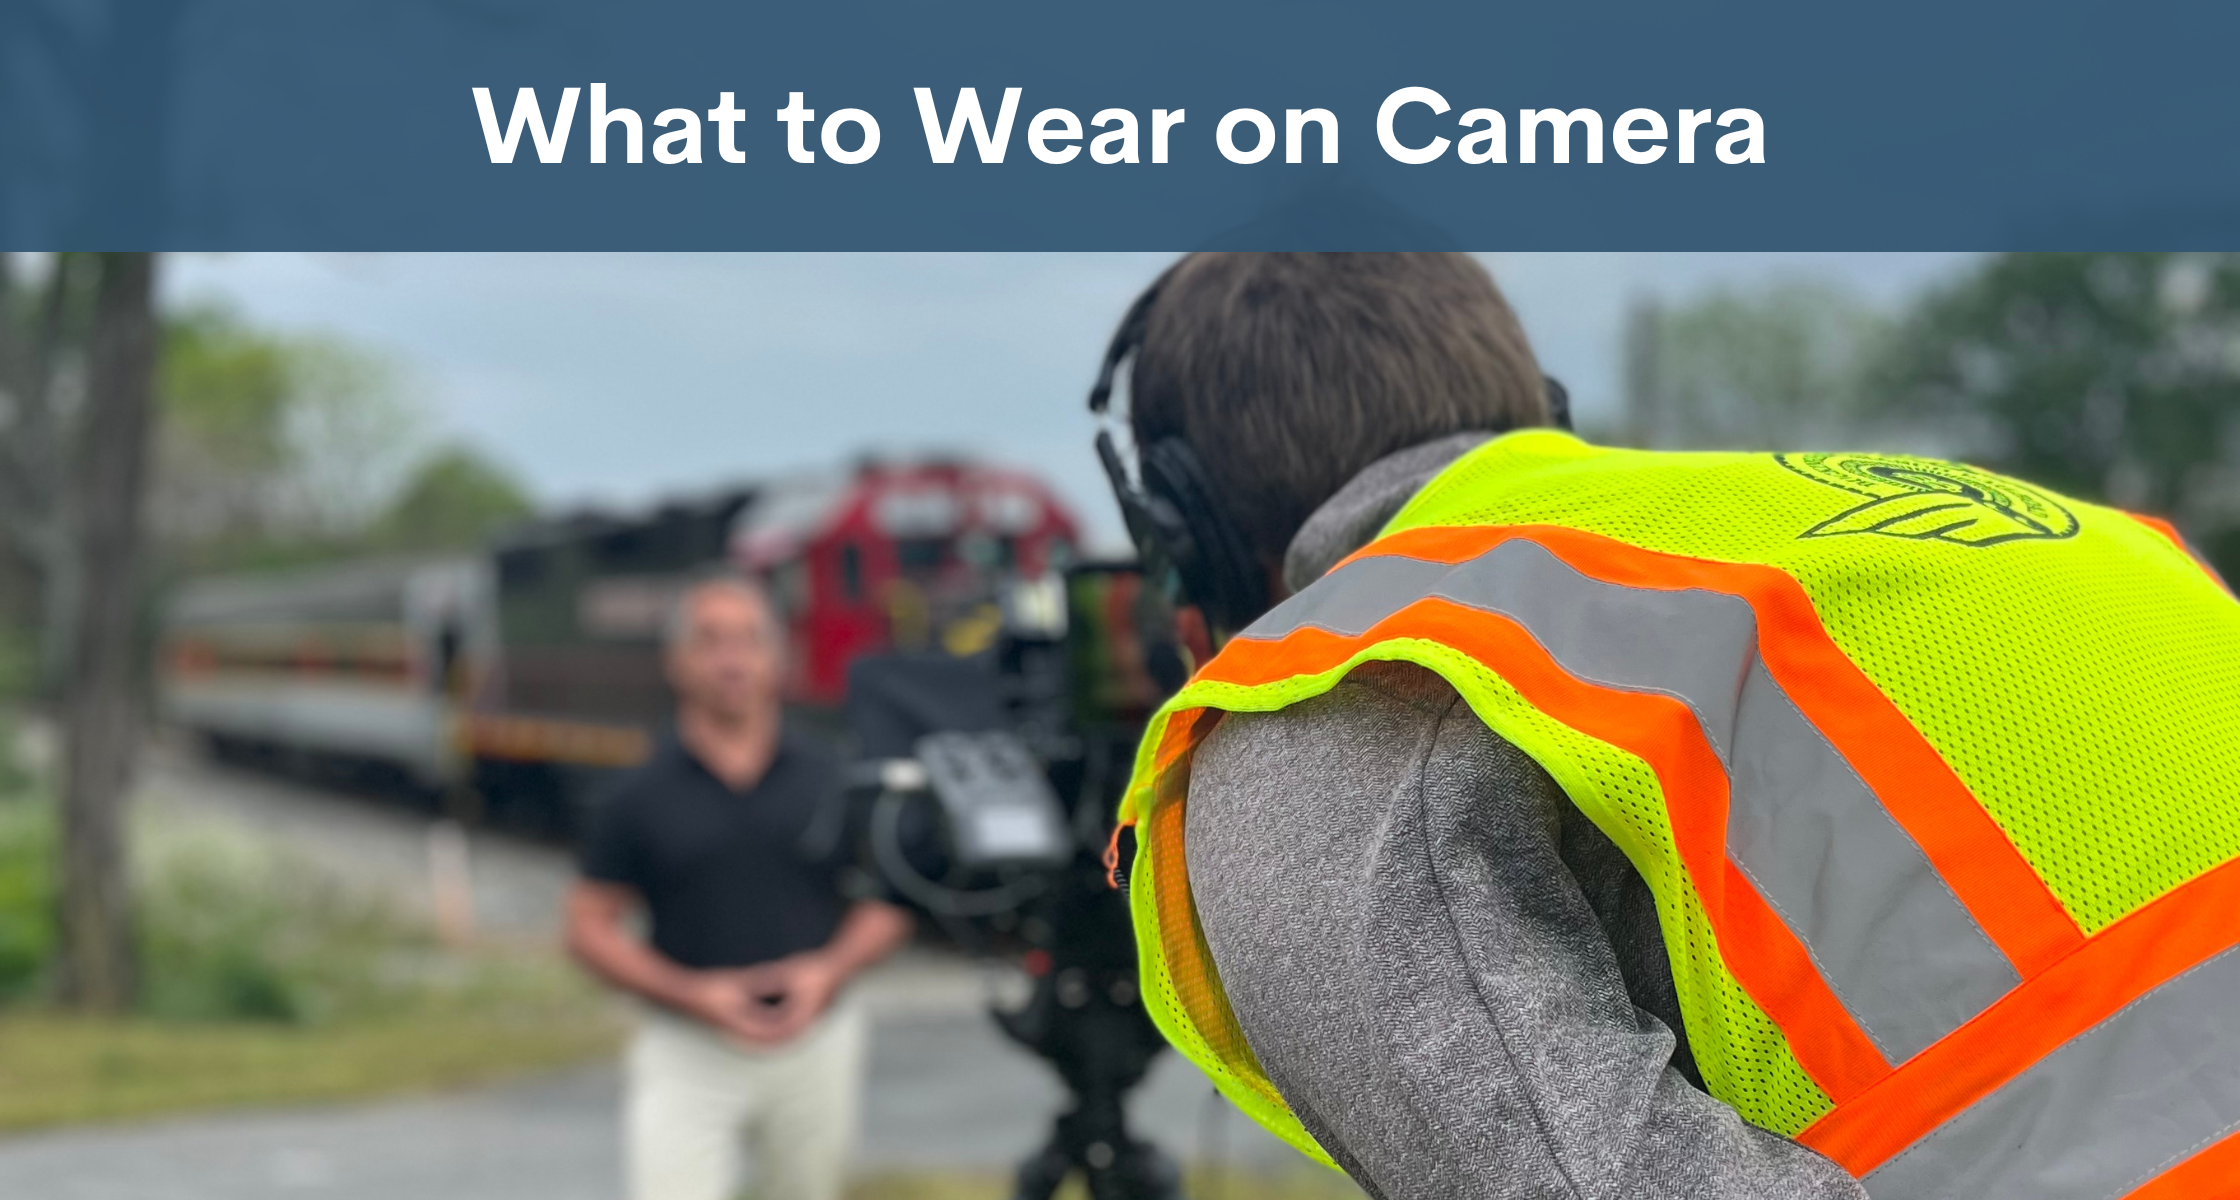 What to Wear on Camera